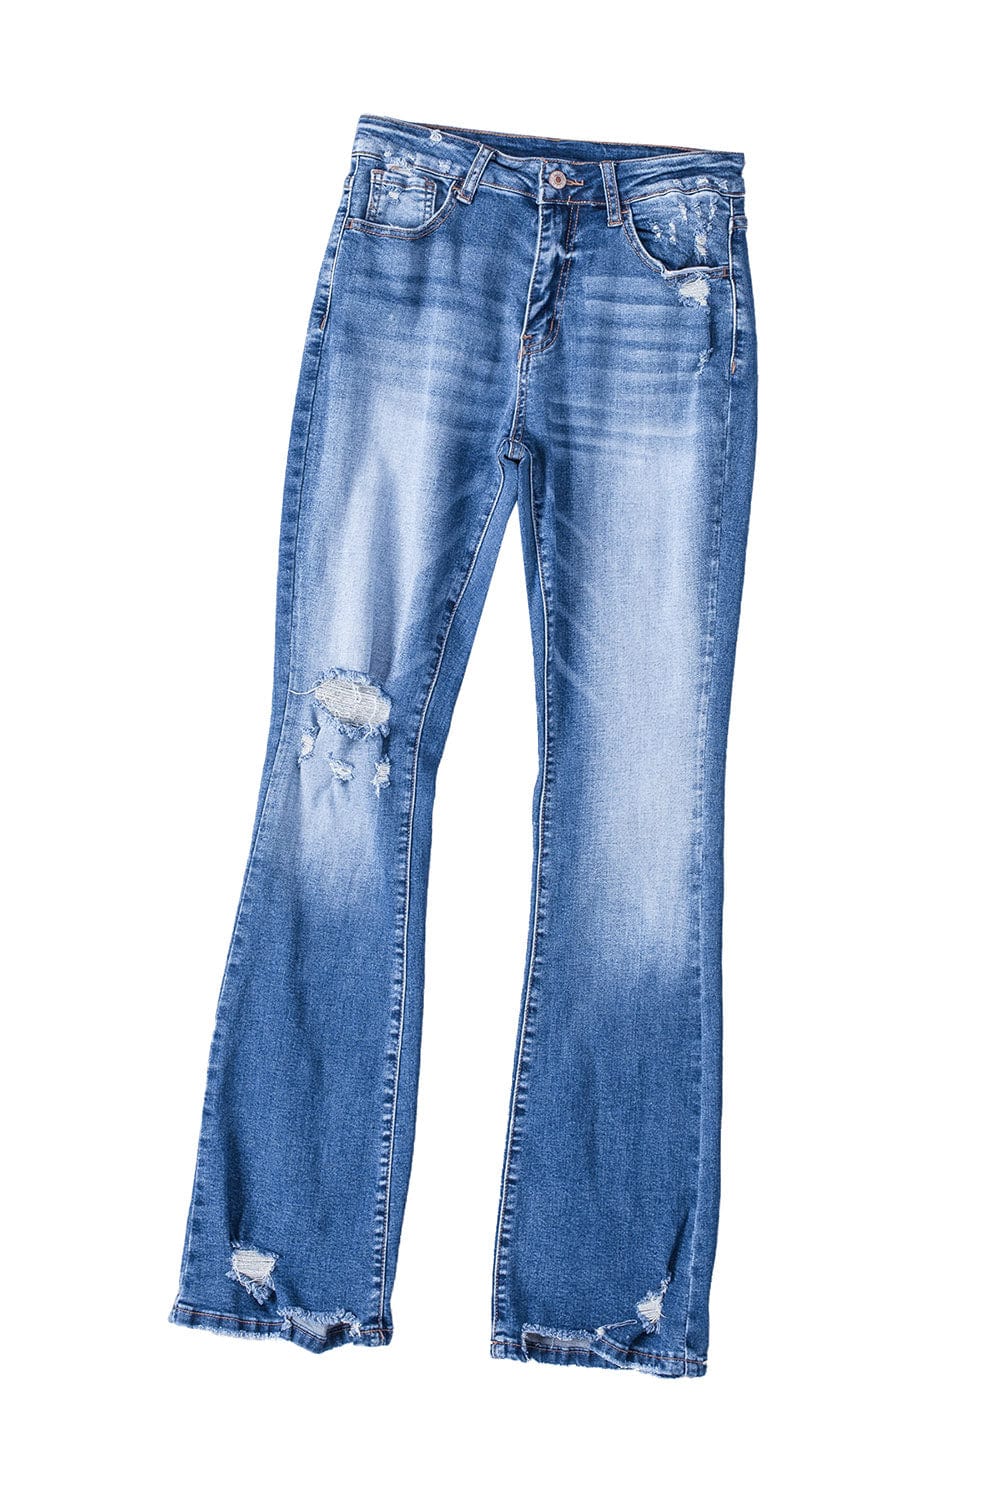 The802Gypsy  Women's Jeans Traveling Gypsy Distressed Flare Jeans